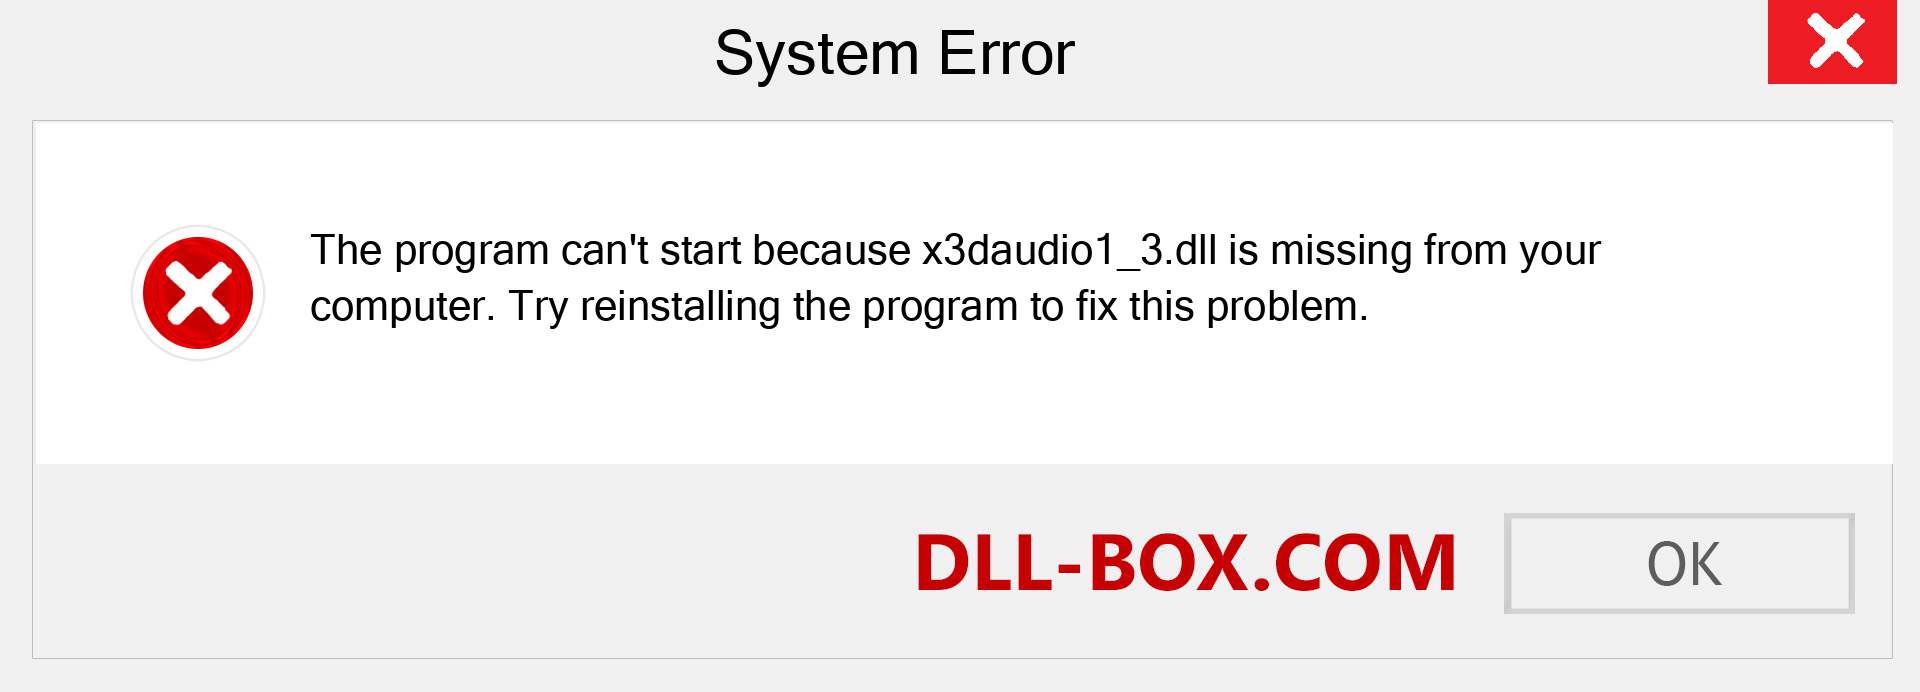  x3daudio1_3.dll file is missing?. Download for Windows 7, 8, 10 - Fix  x3daudio1_3 dll Missing Error on Windows, photos, images